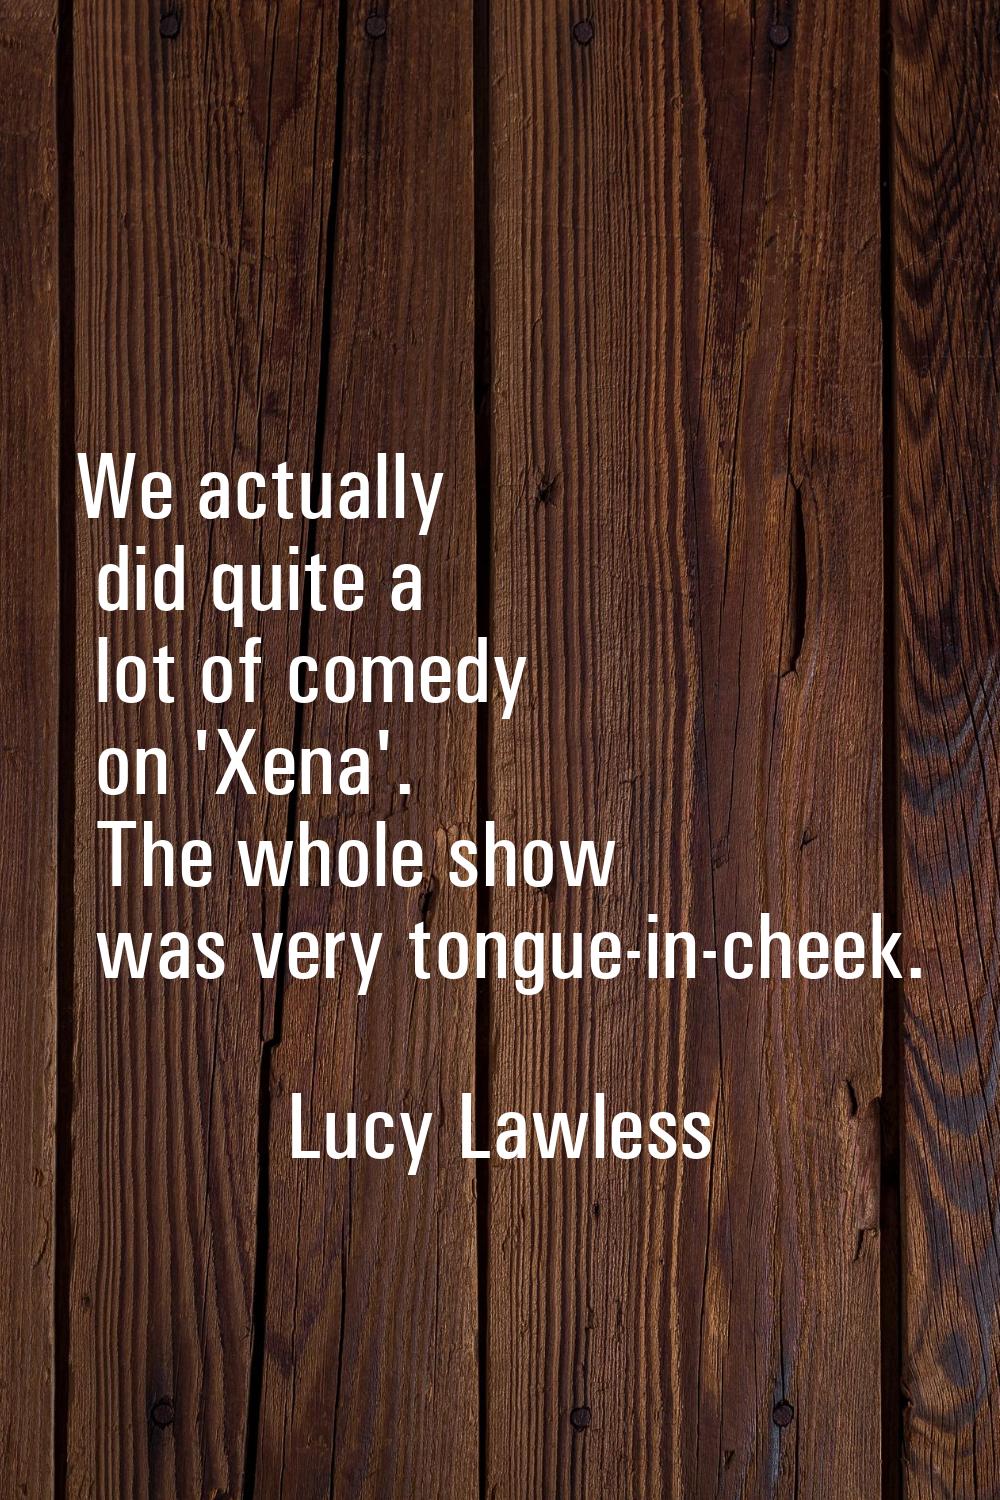 We actually did quite a lot of comedy on 'Xena'. The whole show was very tongue-in-cheek.